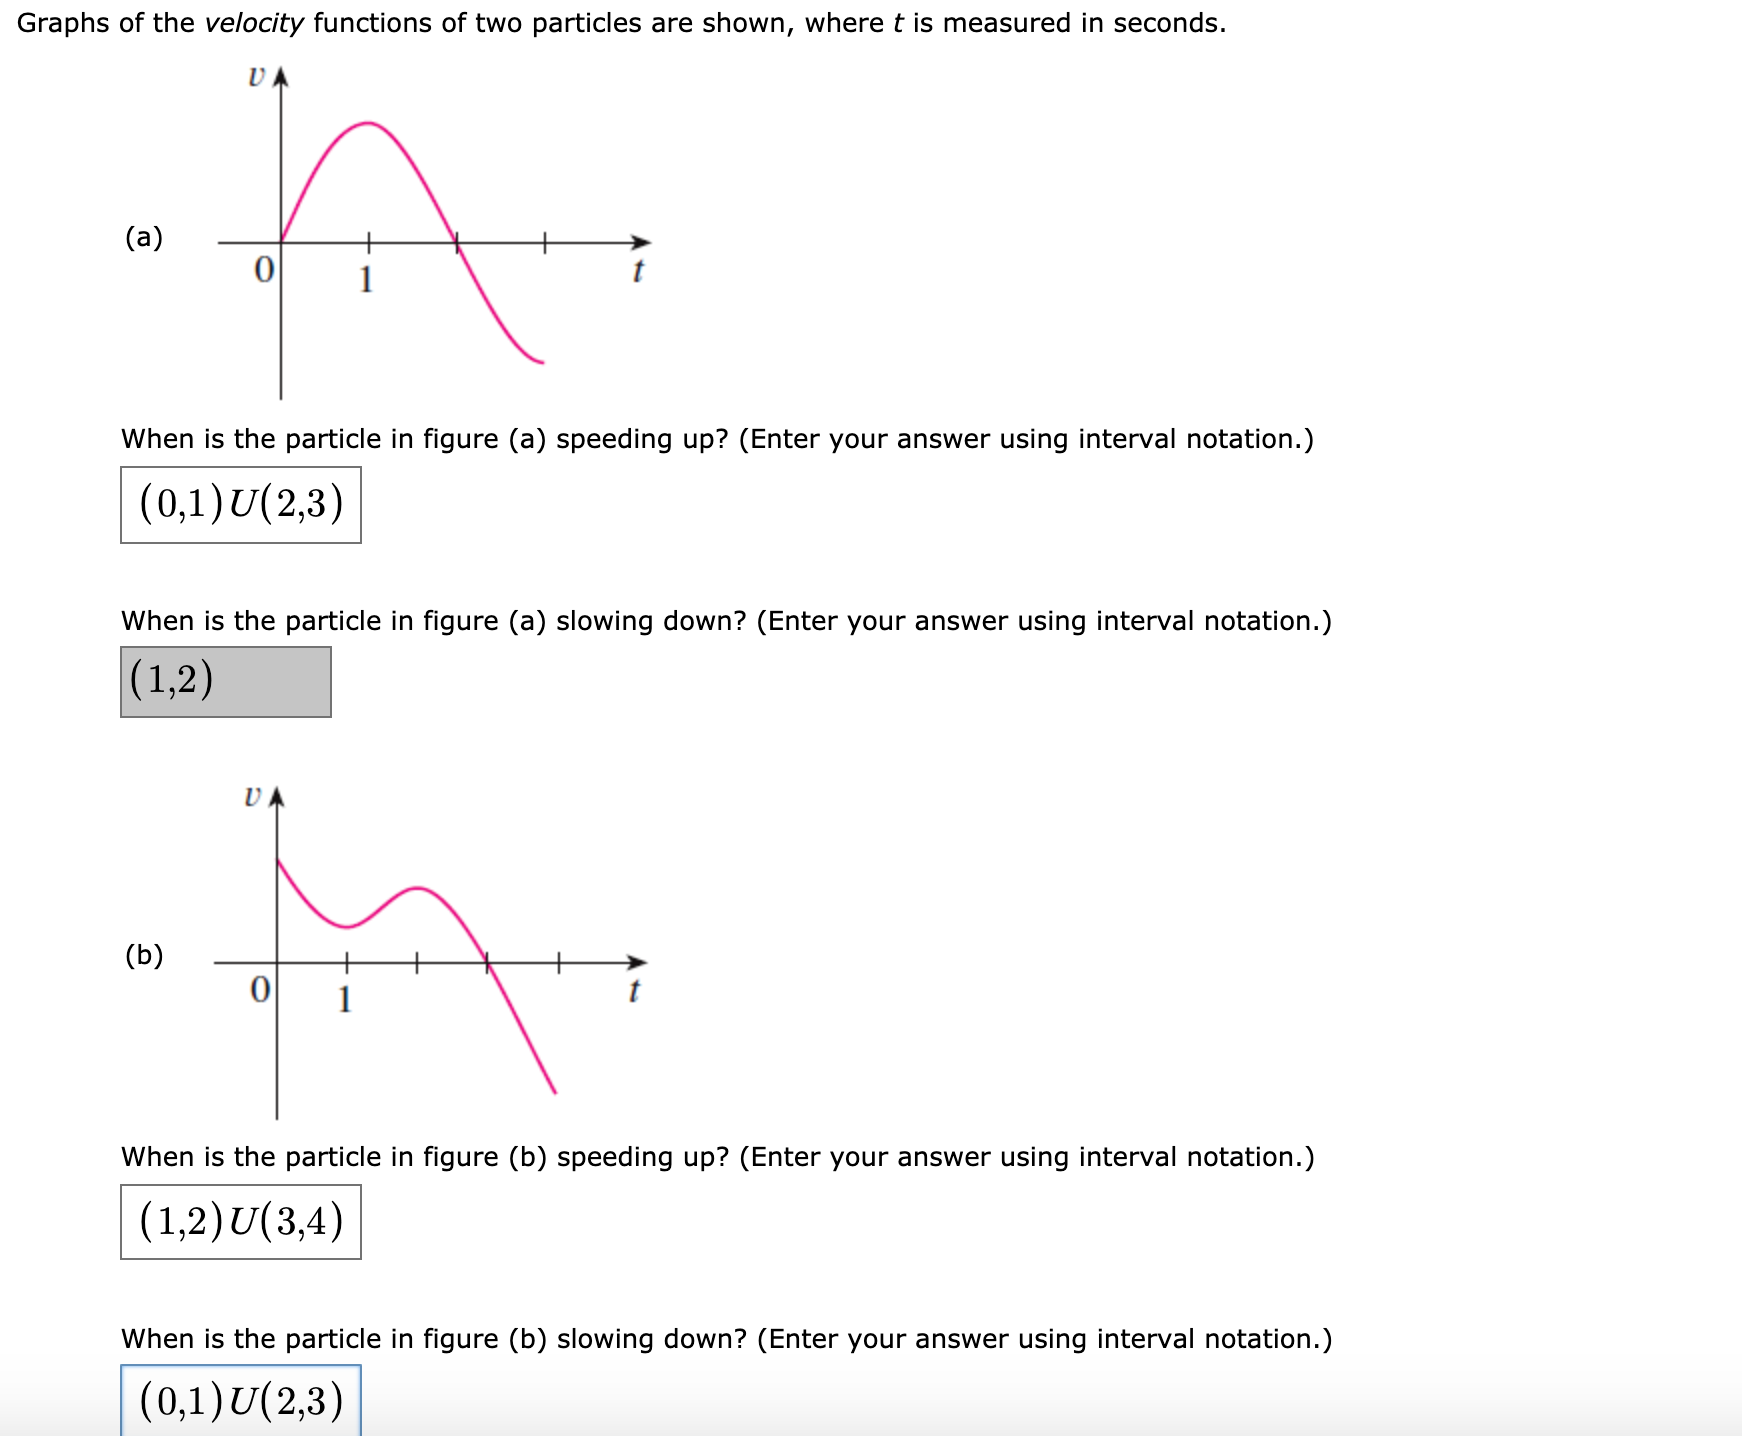 Graphs of the velocity functions of two particles are shown, where t is measured in seconds.
(a)
When is the particle in figure (a) speeding up? (Enter your answer using interval notation.)
(0,1)U(2,3)
When is the particle in figure (a) slowing down? (Enter your answer using interval notation.)
(1,2)
UA
(b)
When is the particle in figure (b) speeding up? (Enter your answer using interval notation.)
(1,2)U(3,4)
When is the particle in figure (b) slowing down? (Enter your answer using interval notation.)
(0,1)U(2,3)
